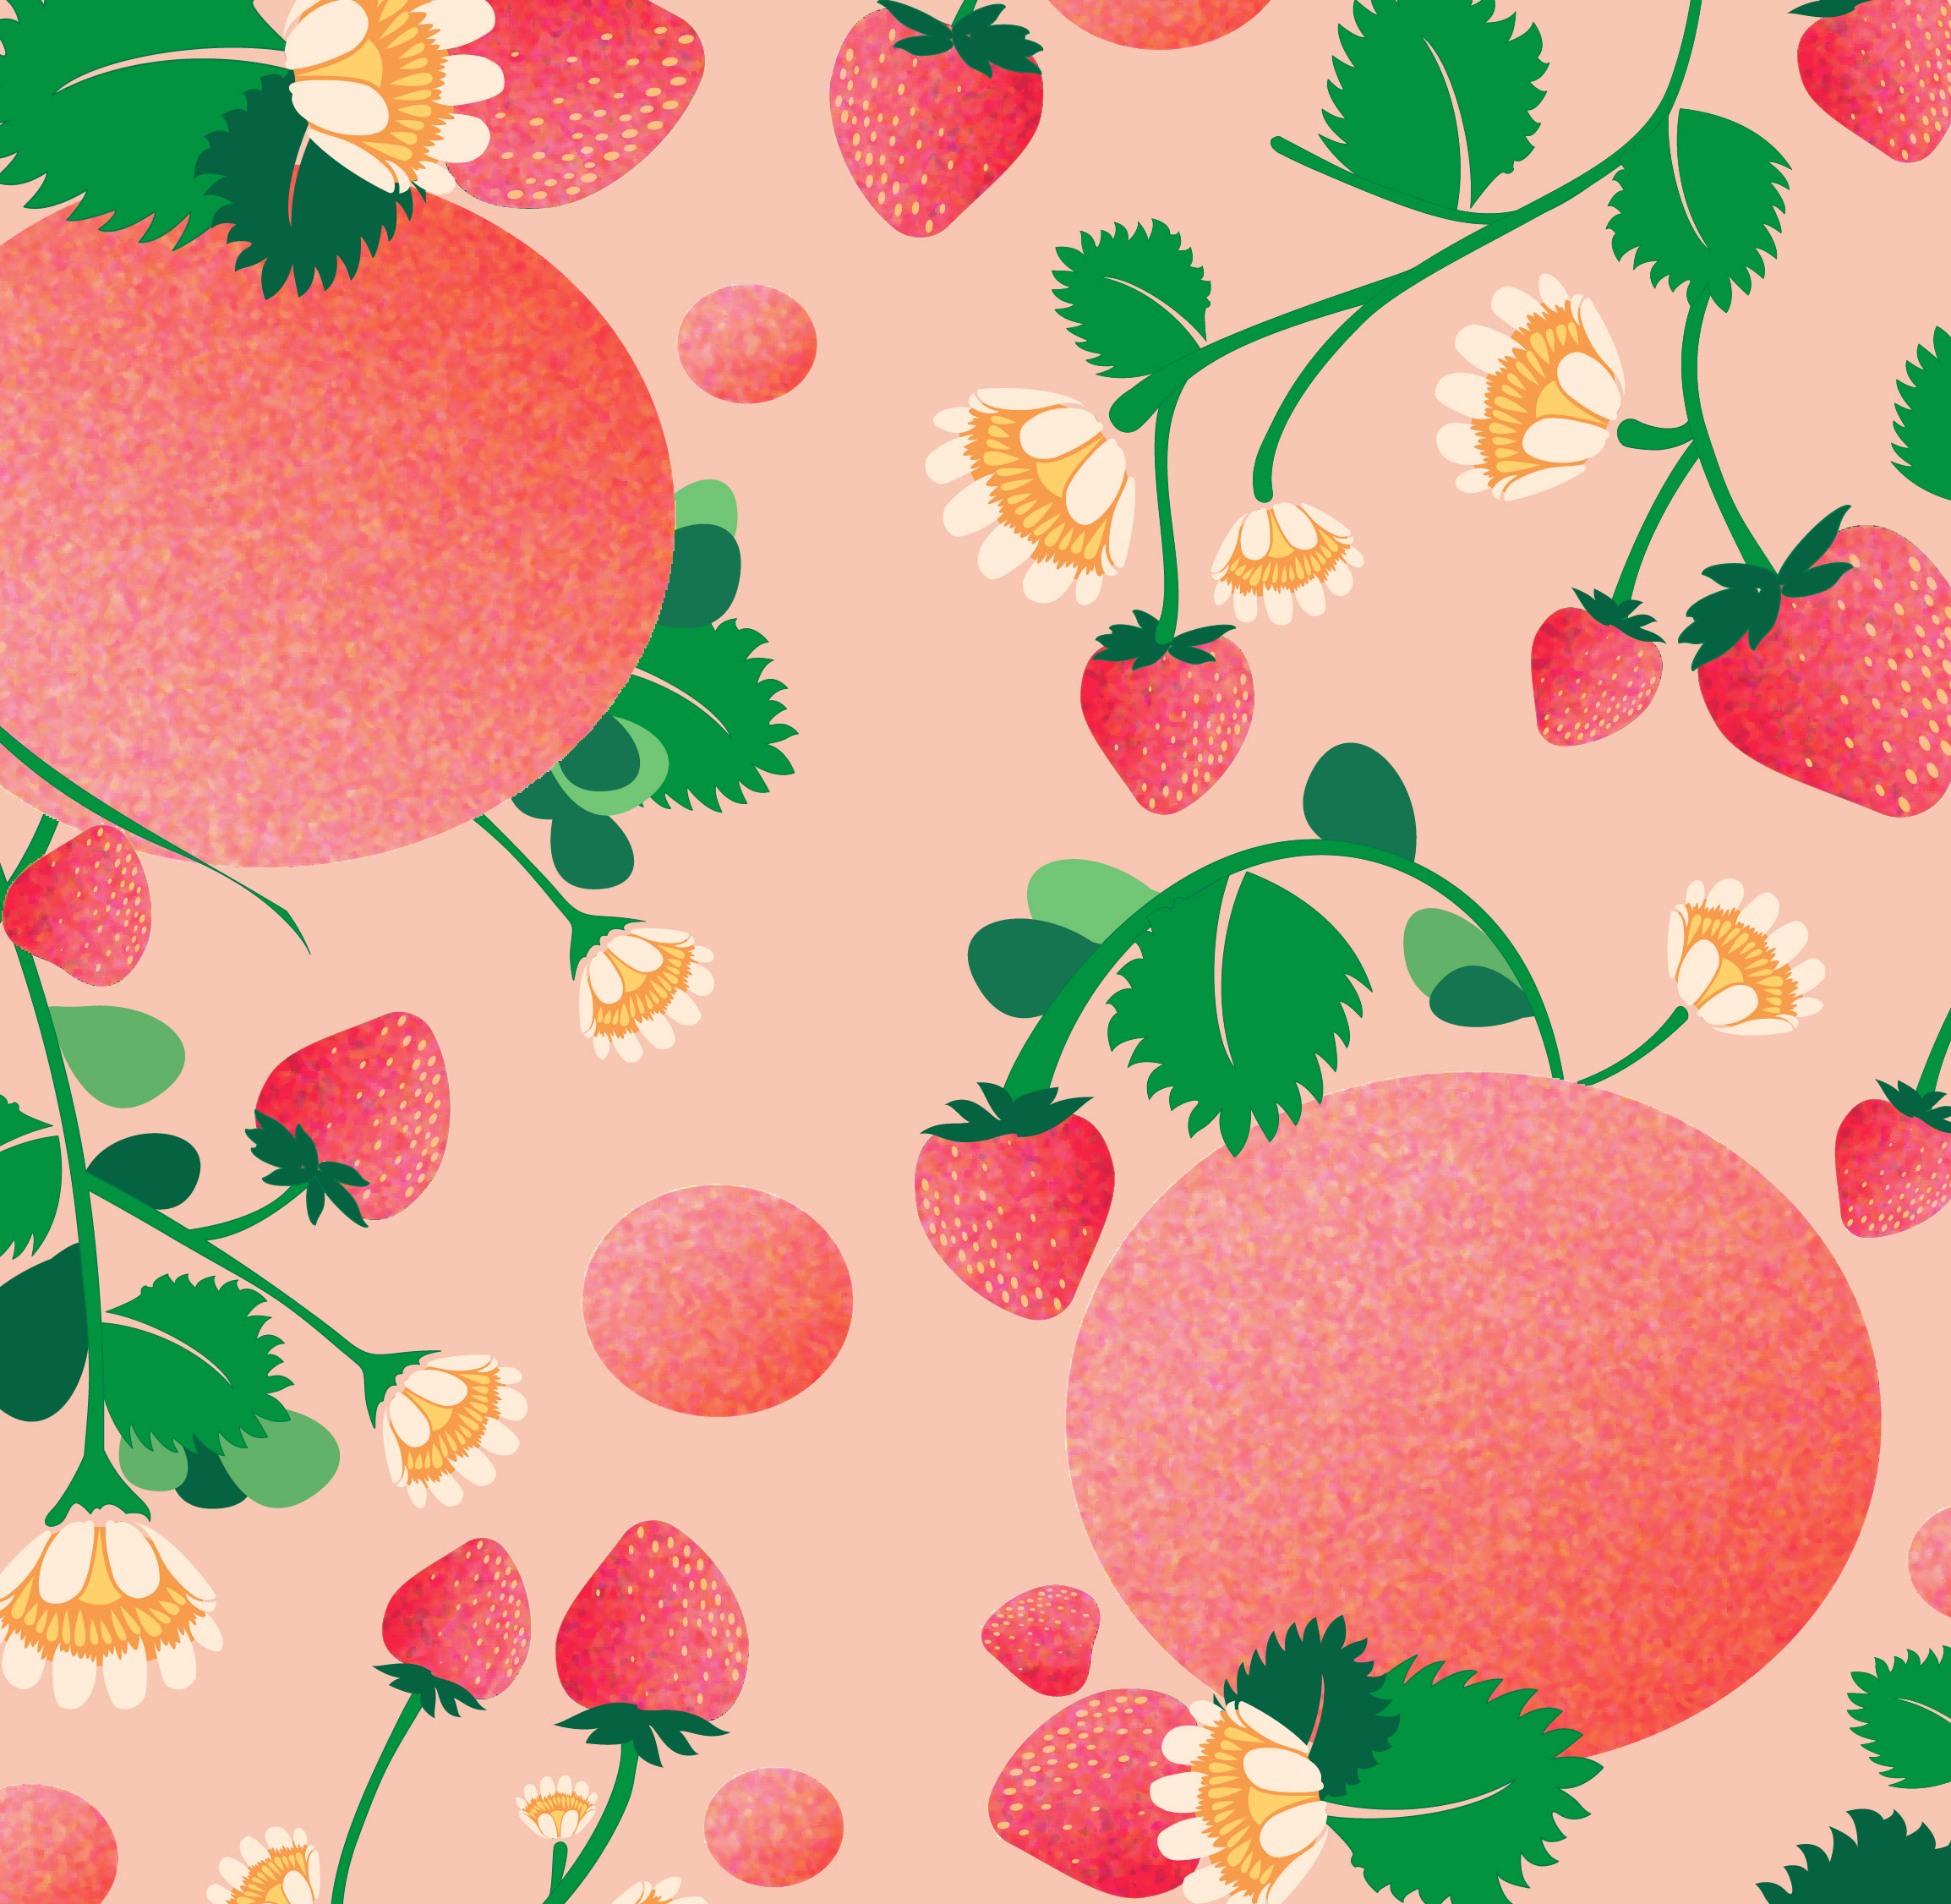 An illustrated pattern. Illustrations of peaches and strawberries on a salmon background with small plants and leaves. 